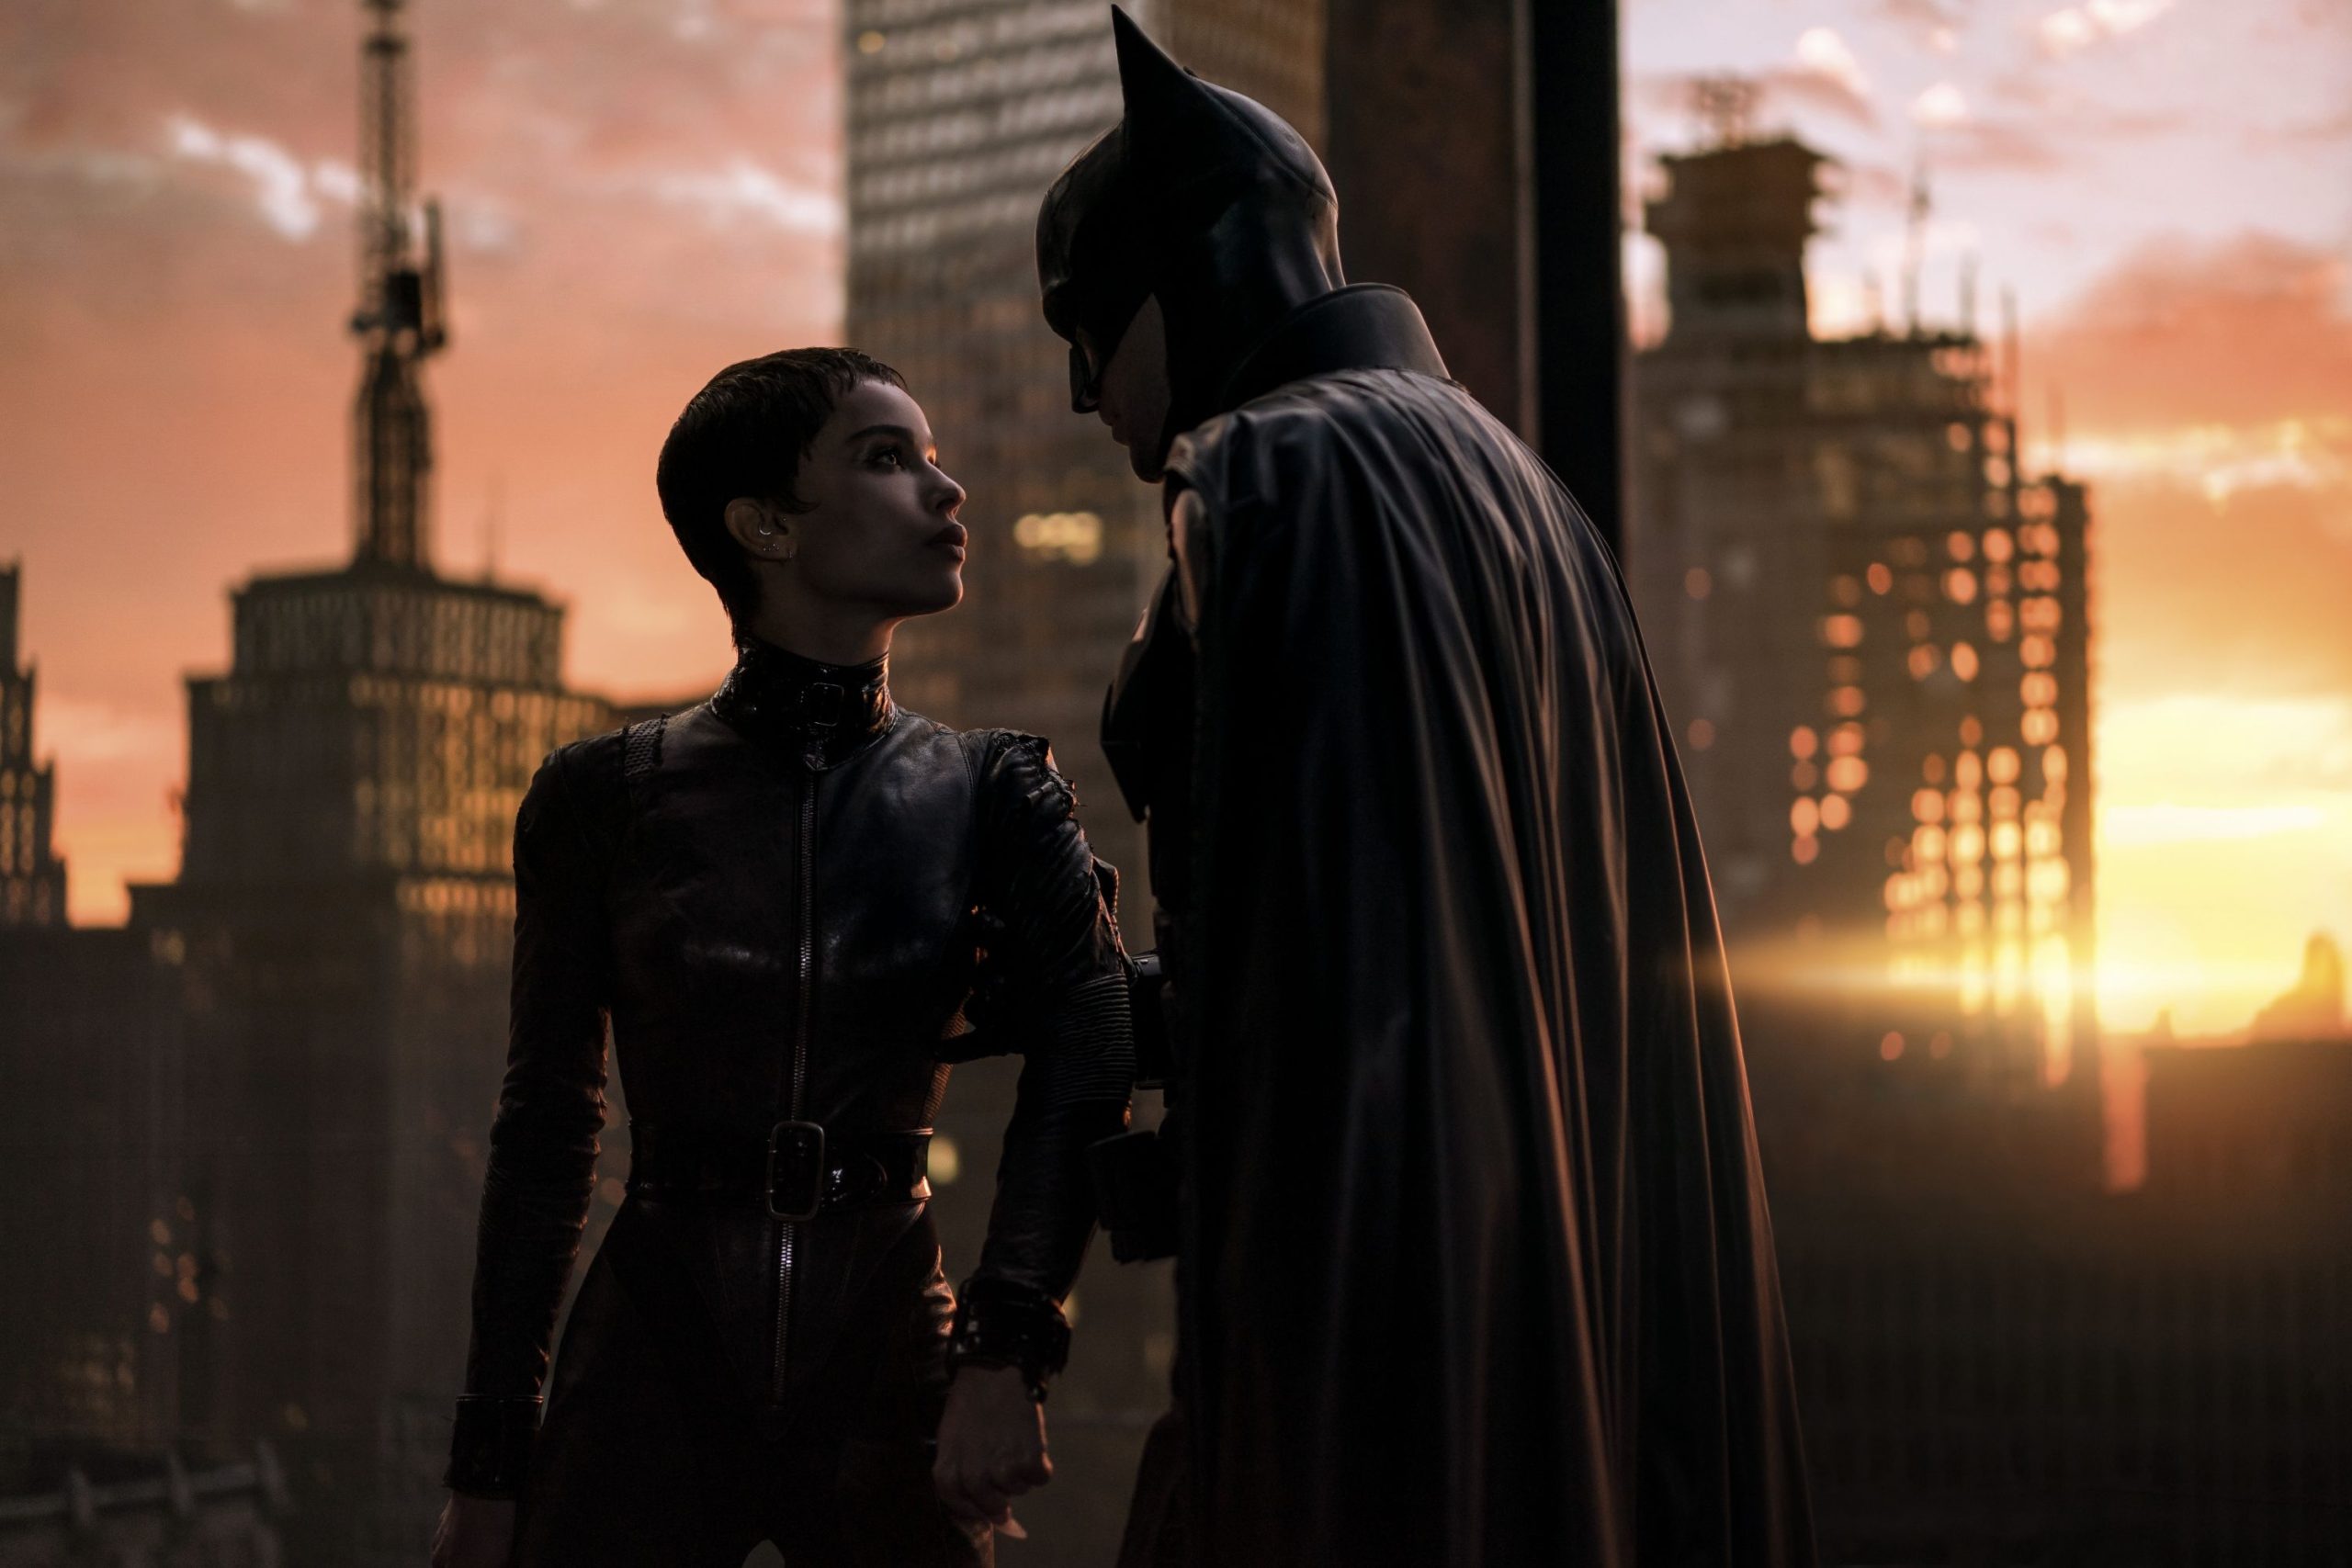 Is there any sex scenes in the new batman movie